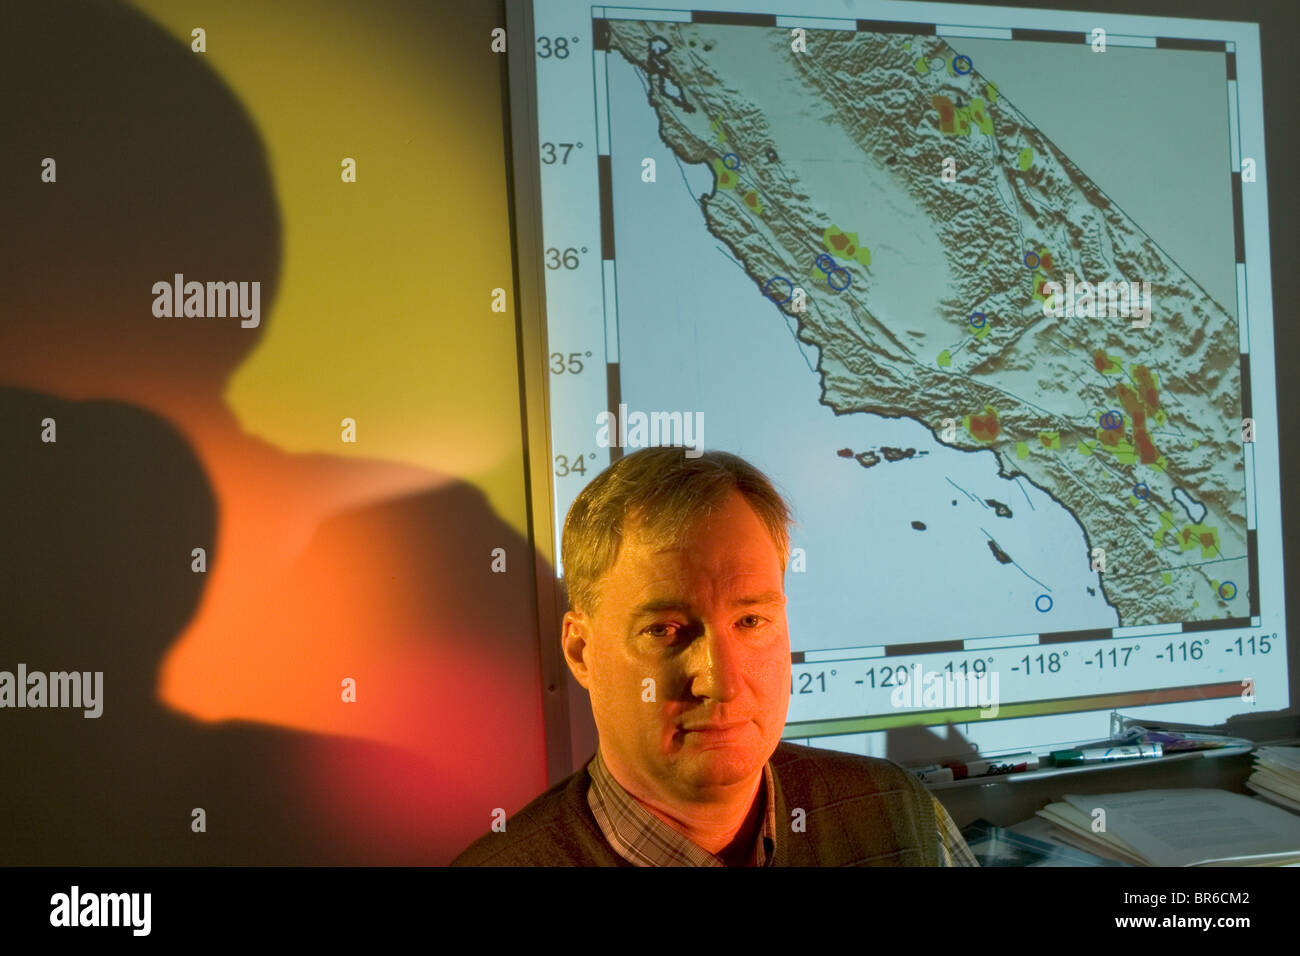 John Rundle with his Earthquake hot spots map. Stock Photo